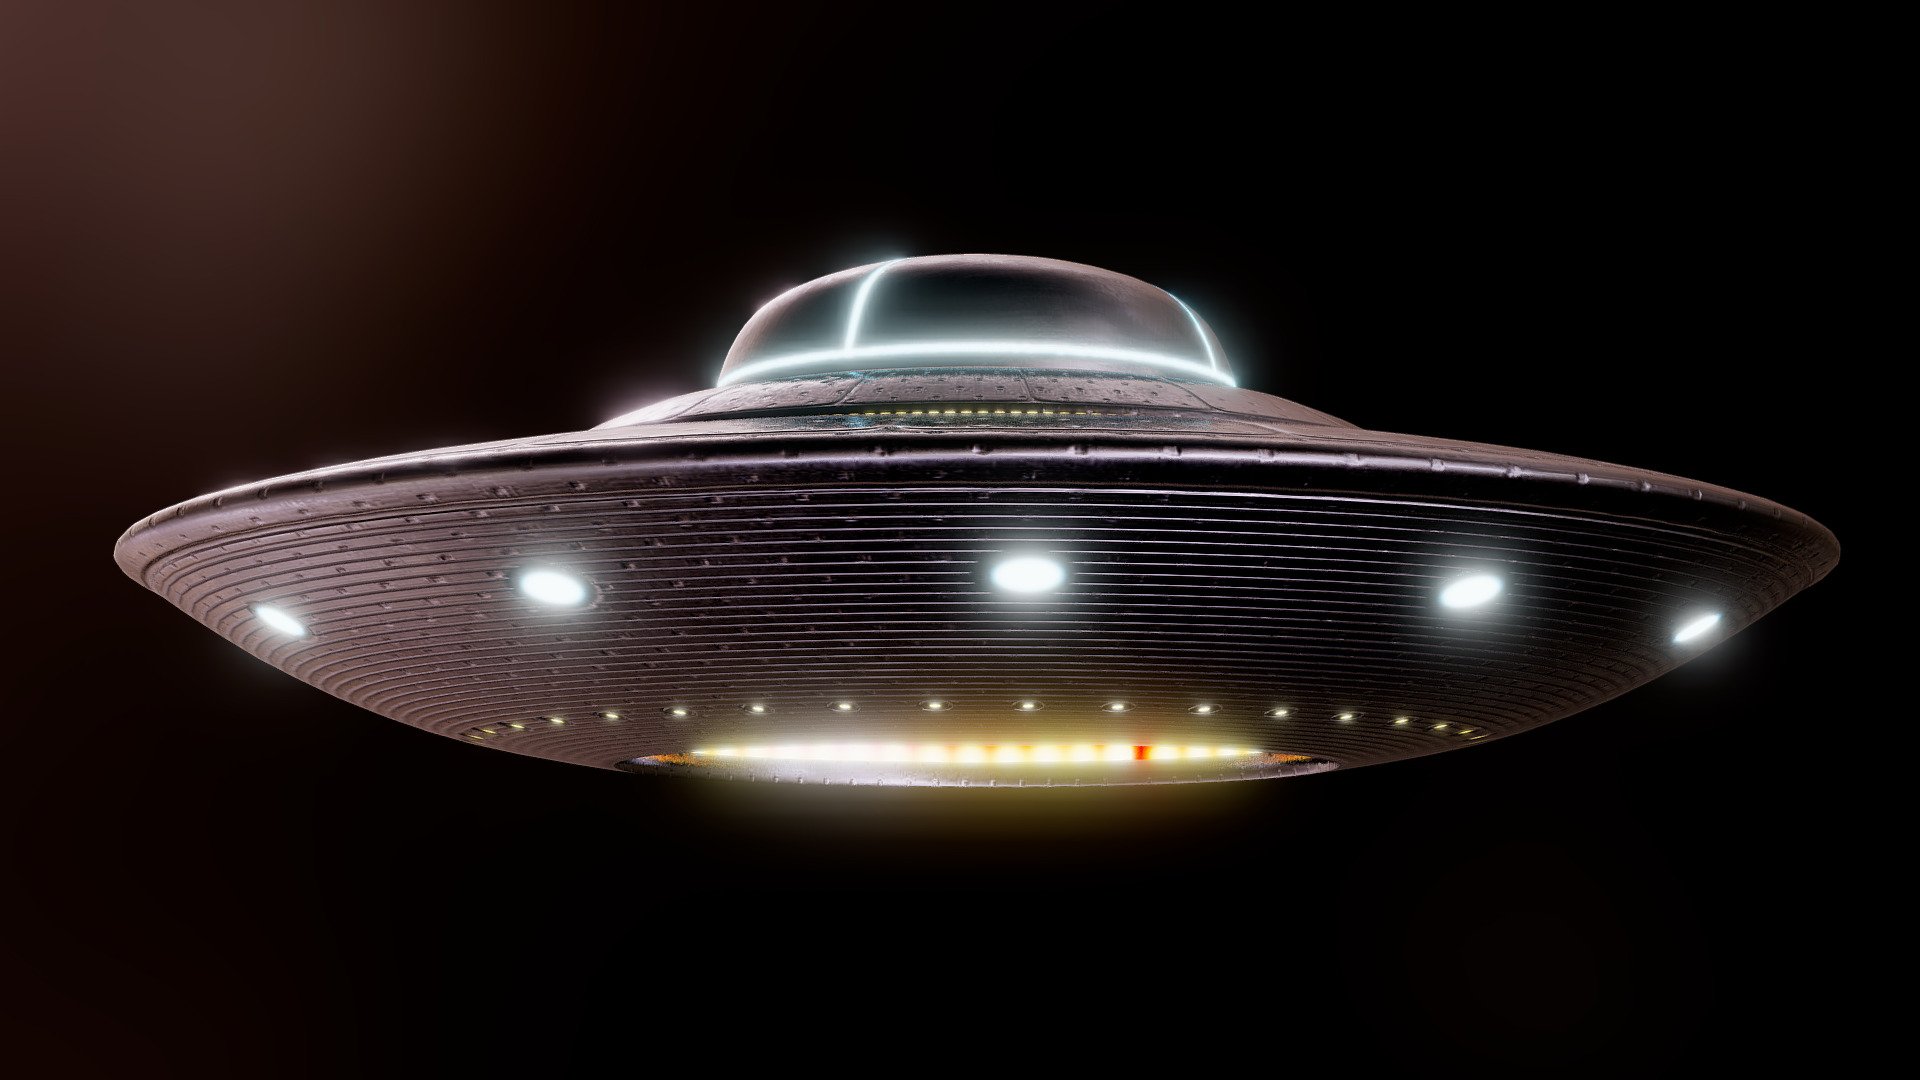 An unidentified flying object (UFO) is any perceived aerial phenomenon that cannot be immediately identified or explained. On investigation, most UFOs are identified as known objects or atmospheric phenomena, while a small number remain unexplained.

Modeled in Blender &amp; painted in Substancepainter 

Available textures 8K resolution &amp; for Unity at 8K resolution URP. 

Below preview from substance painter.  



 - UFO SAUCER - Buy Royalty Free 3D model by Abdurhman Aljakthami (@penpcm) 3d model